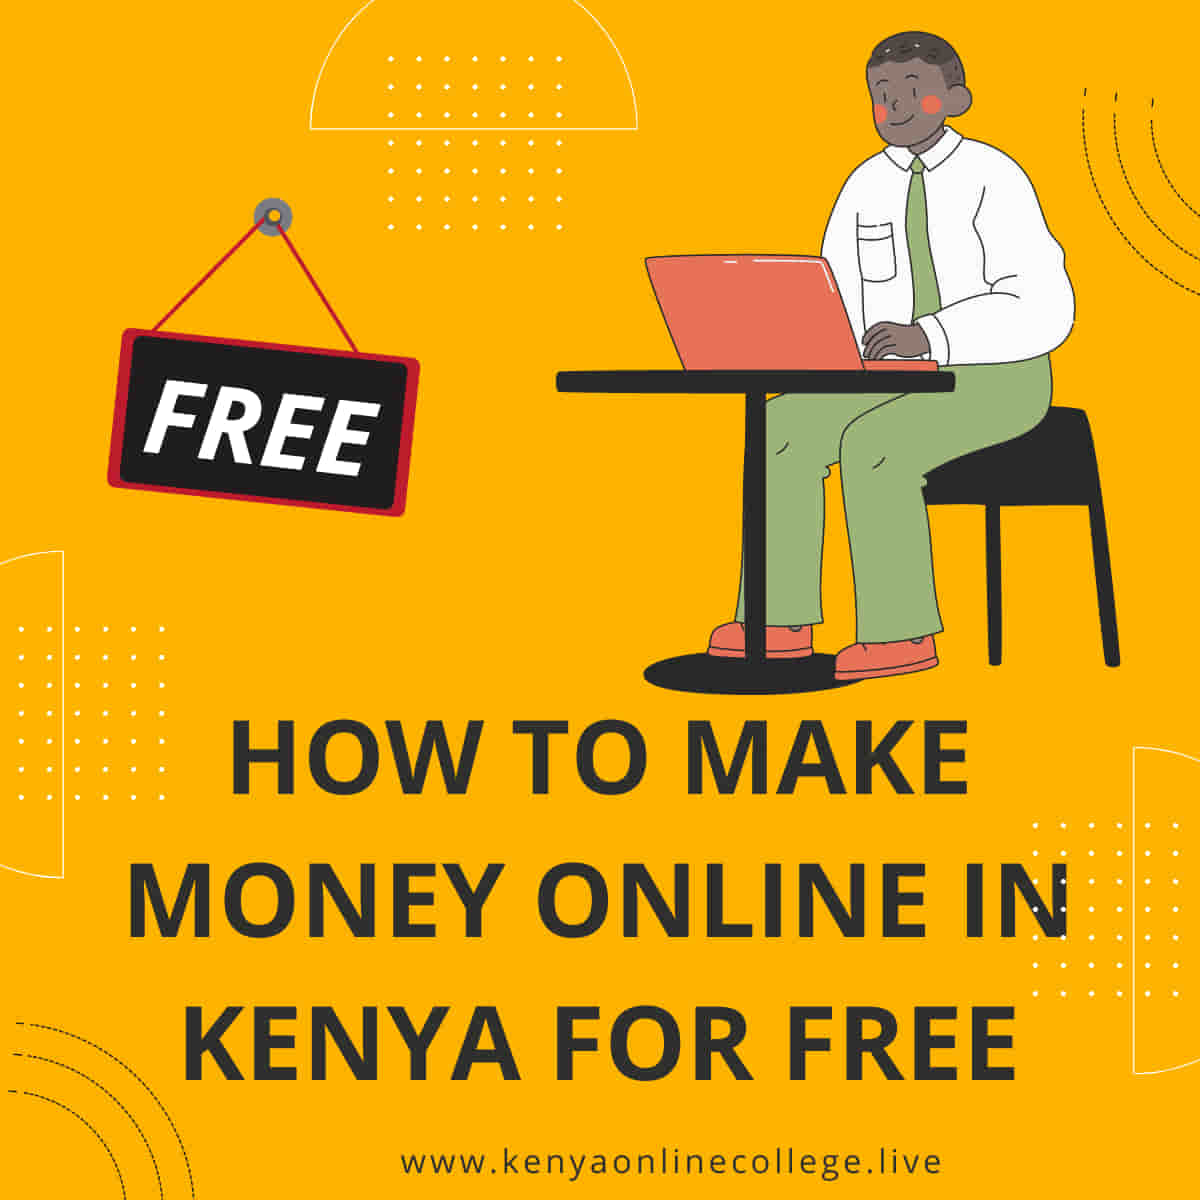 How to make money online in Kenya for free